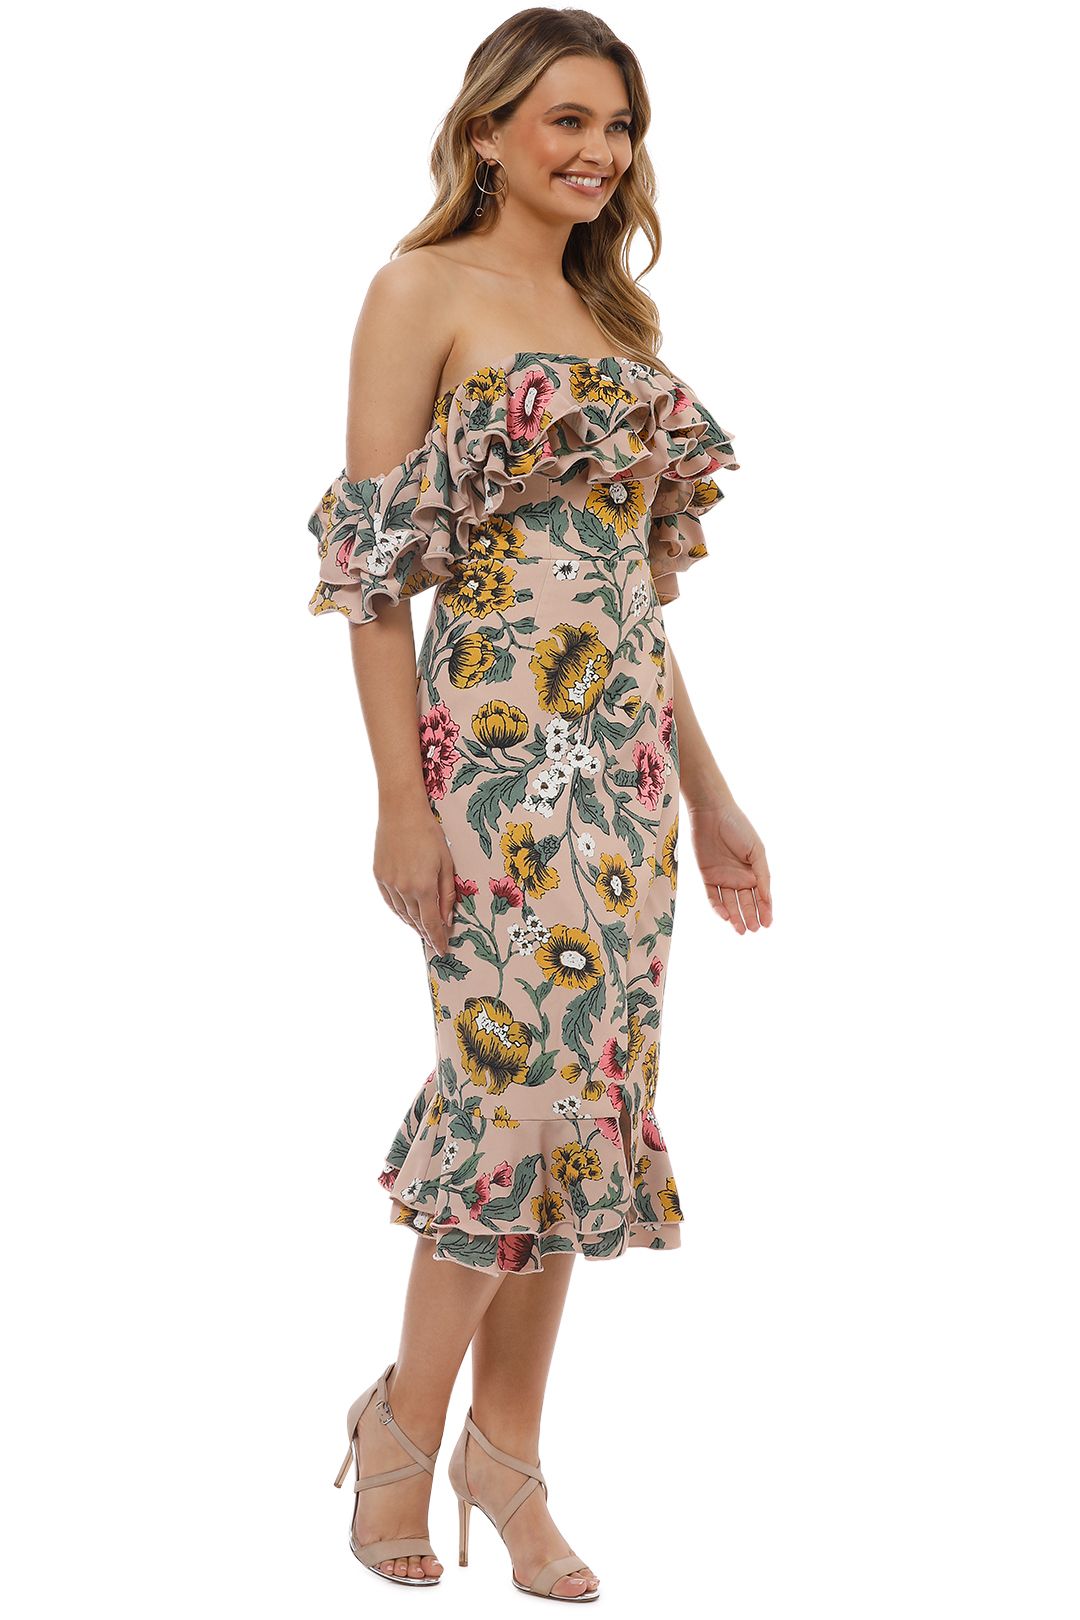 Cameo - Immerse Midi Dress - Blush Floral - Side